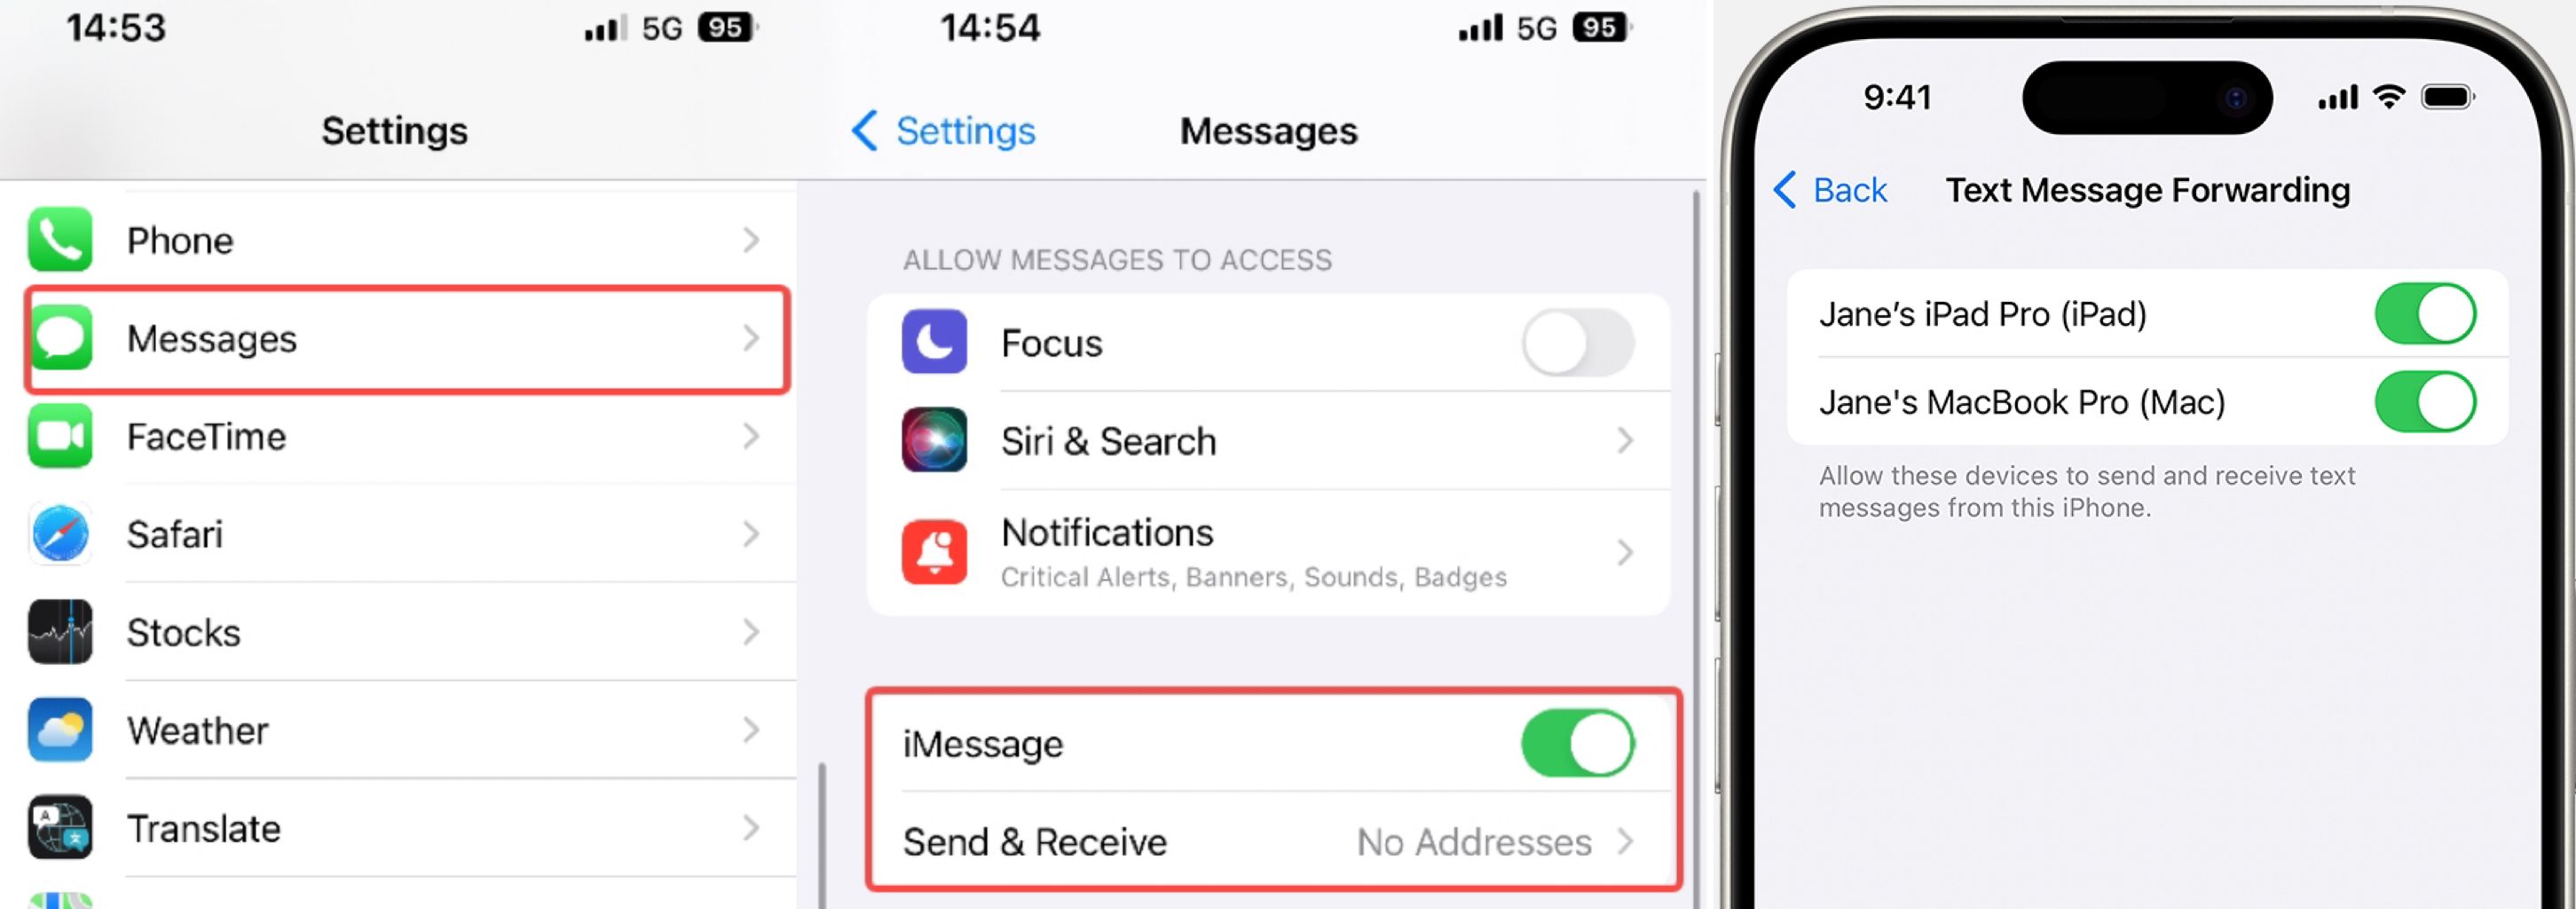 Steps of forwarding text messages secretly on an iPhone.